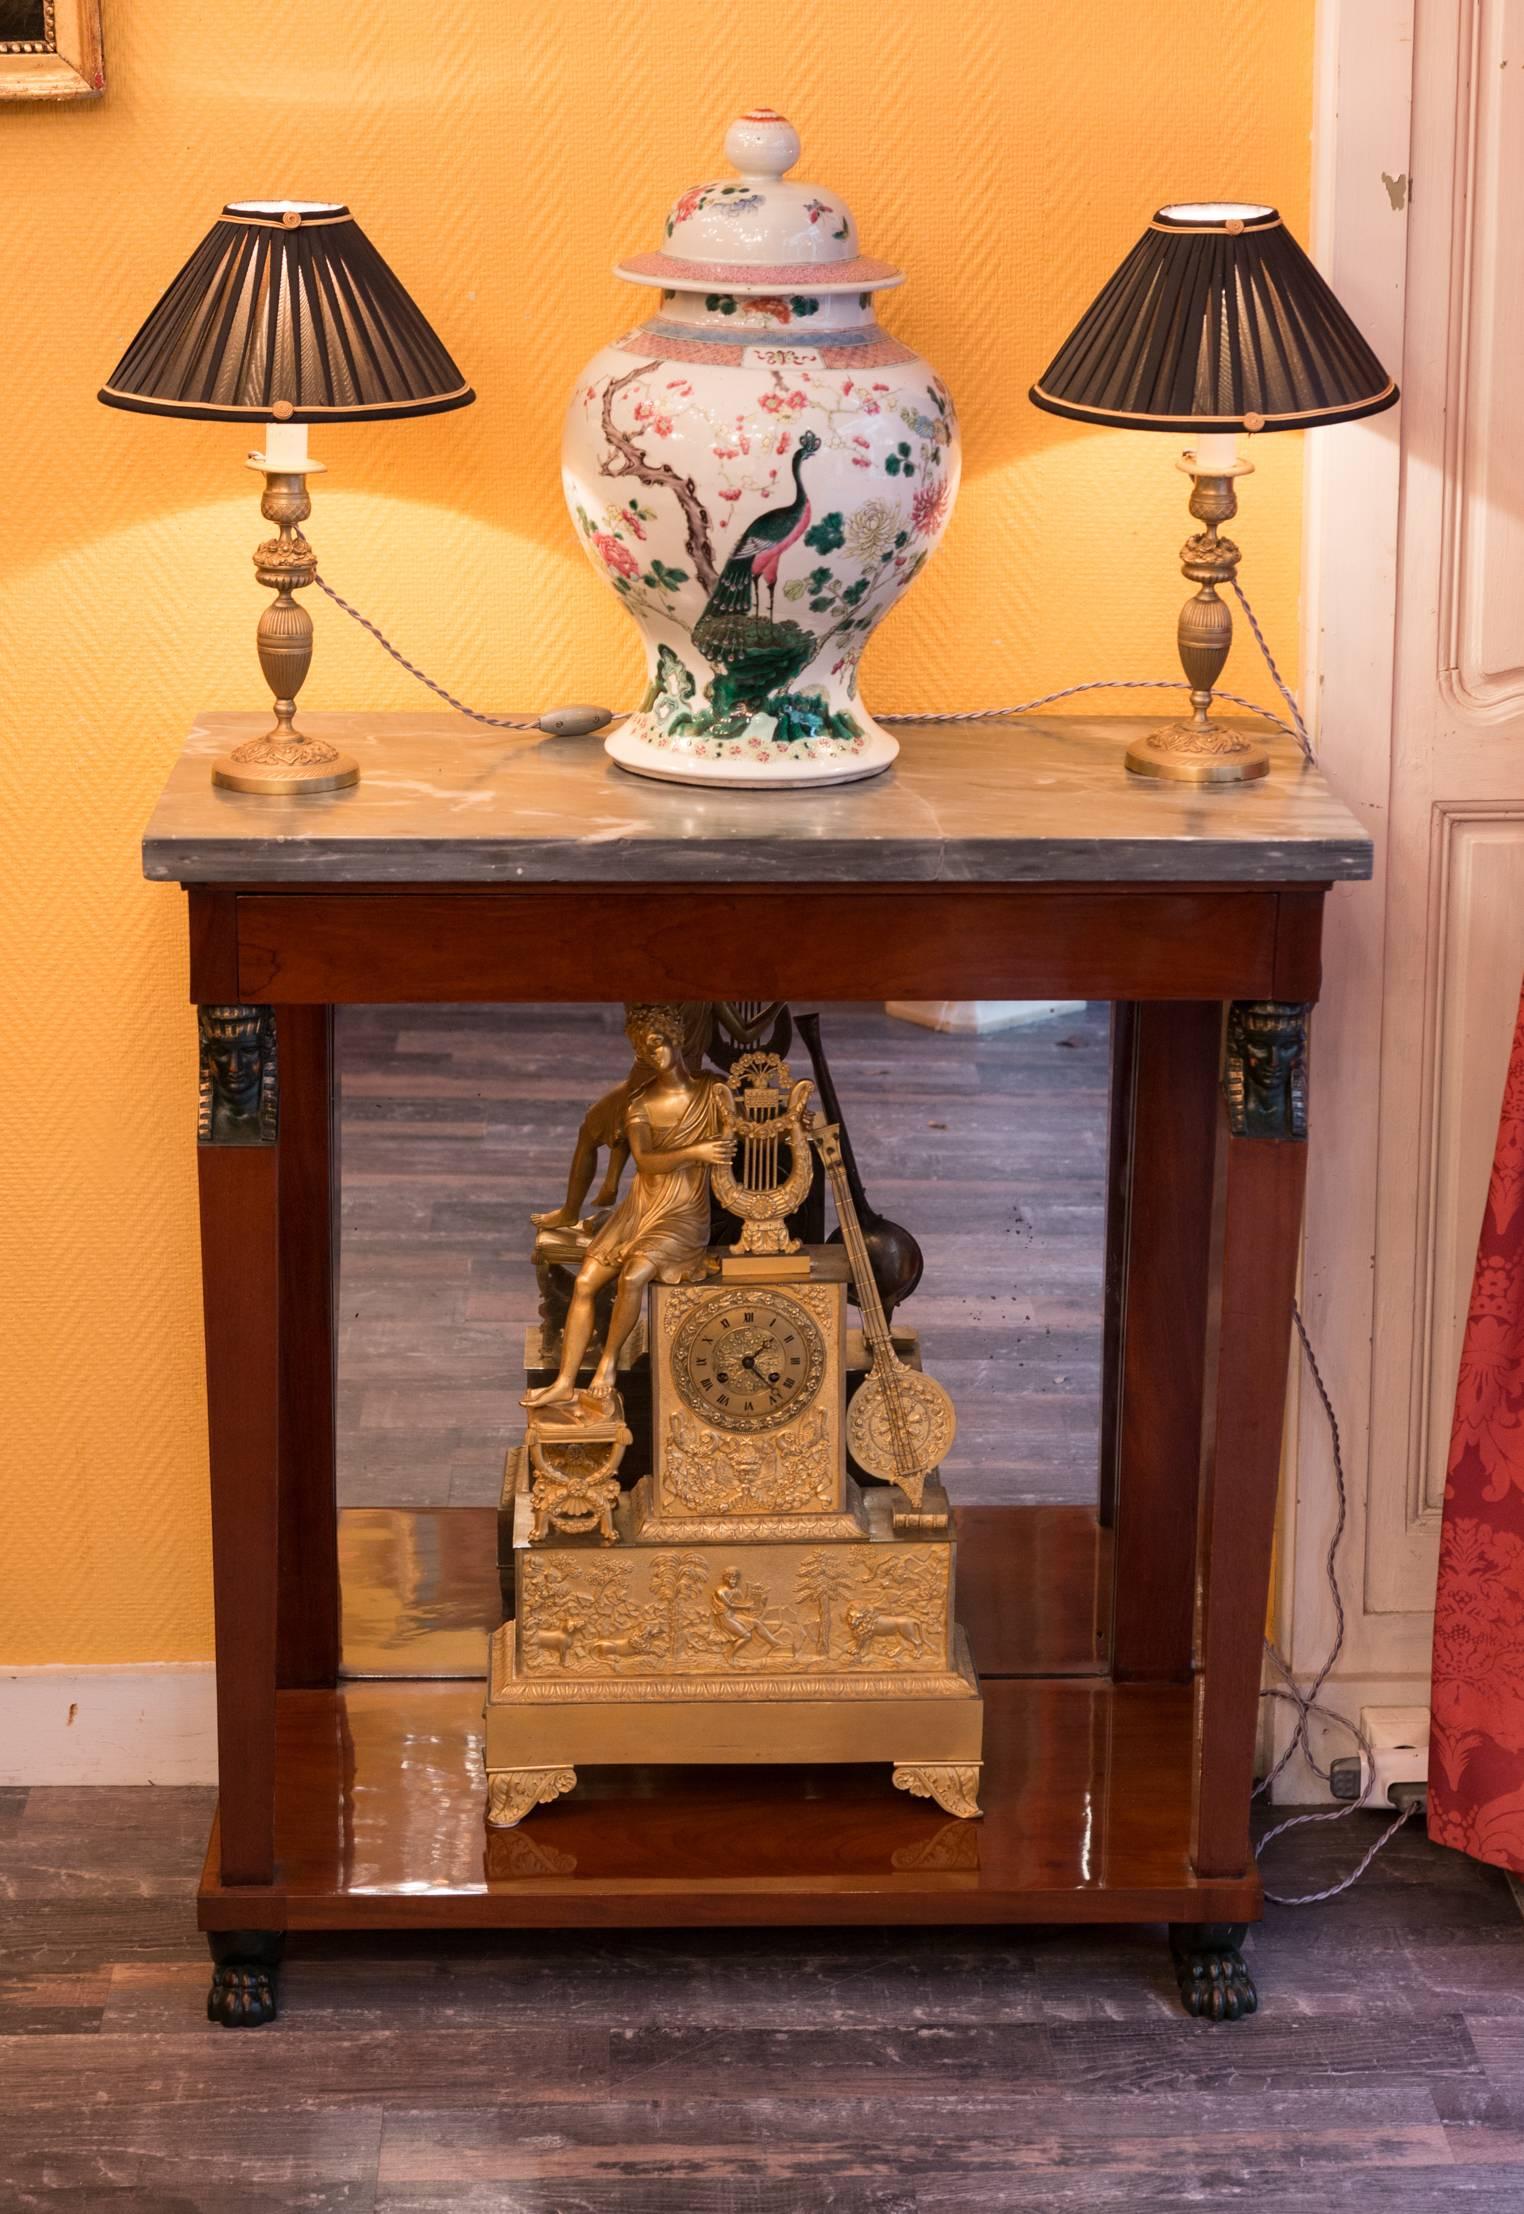 A lovely, fine and rare French Consulate period mahogany and mahogany Honduras veneer artistic console, with “Bleu de Turquin” marble-top. This console with its simplicity of design, with its finely detailed patinated hand-carved wood mounts, make